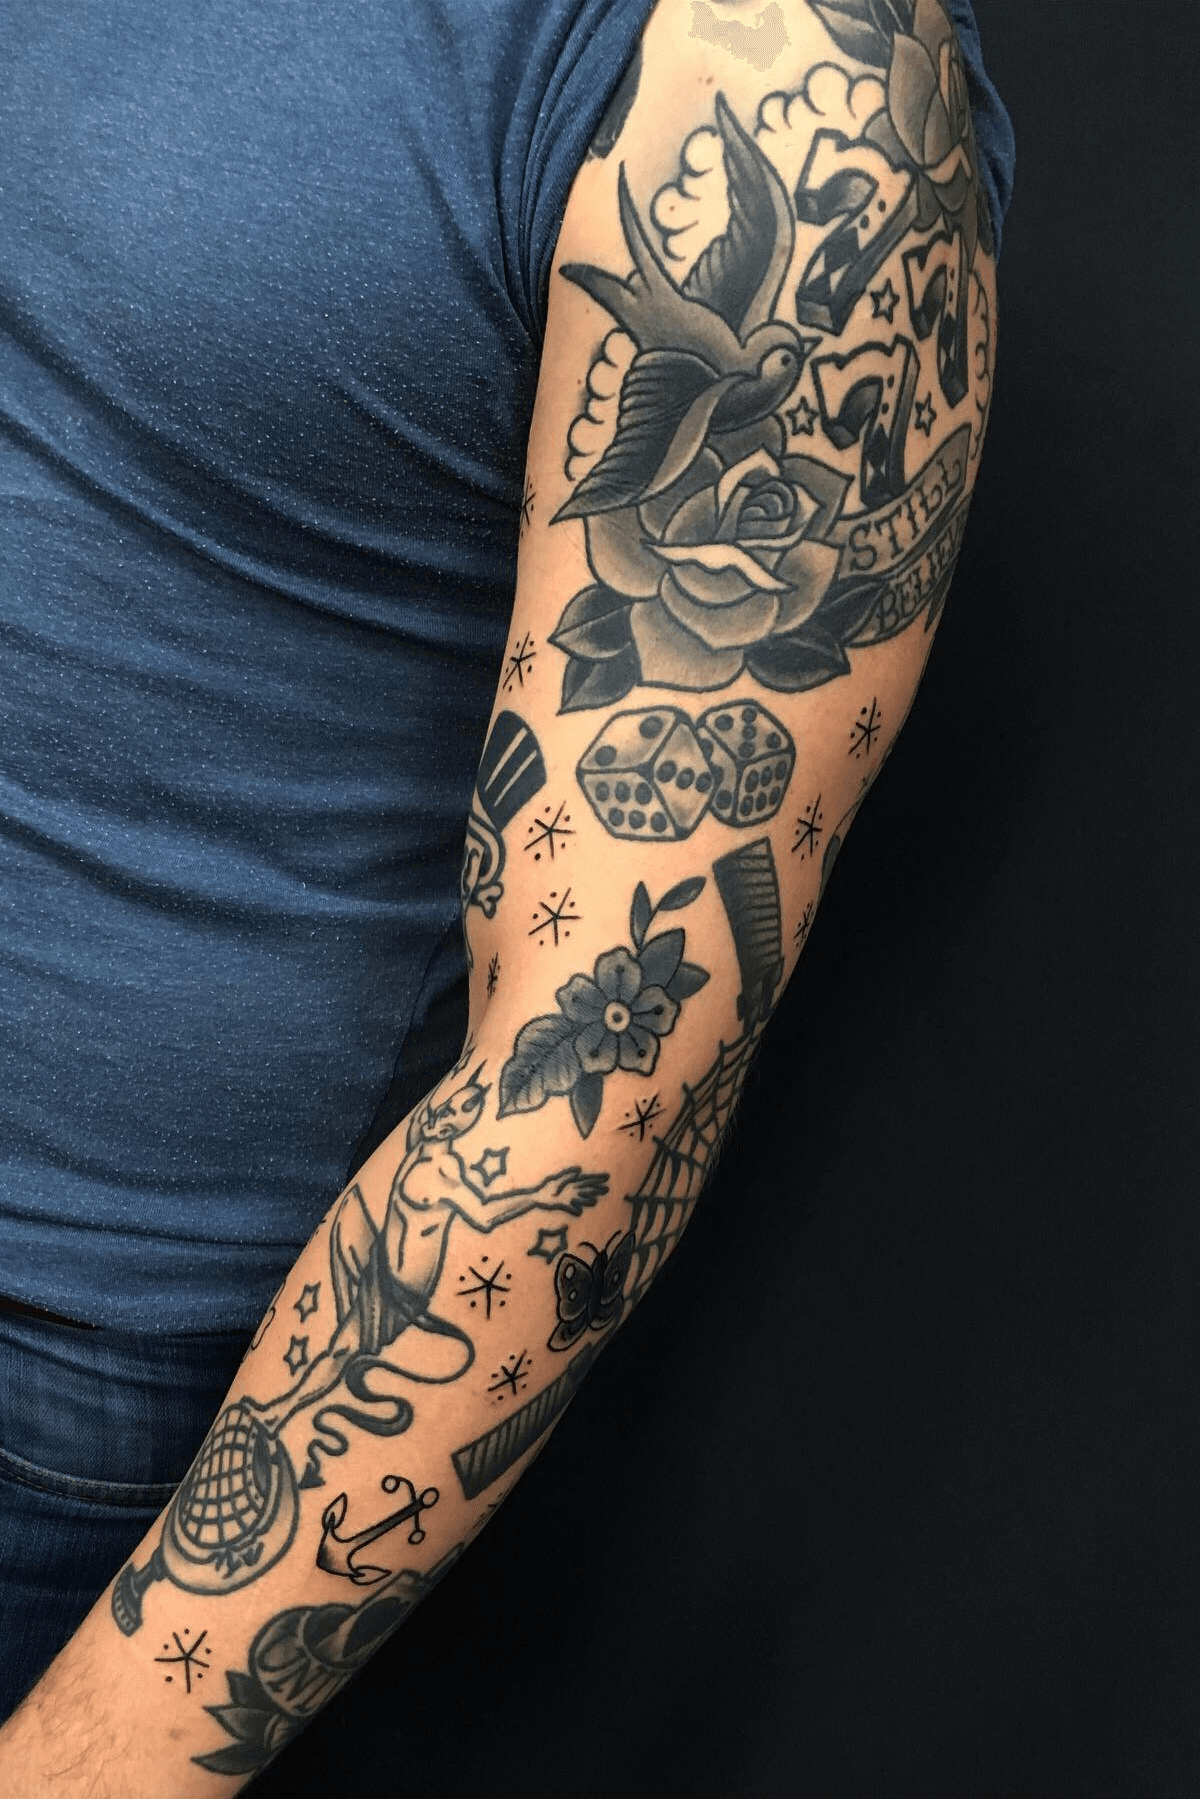 Patchwork Tattoos What They Are And Examples Of Patchwork Tattoos   MrInkwells